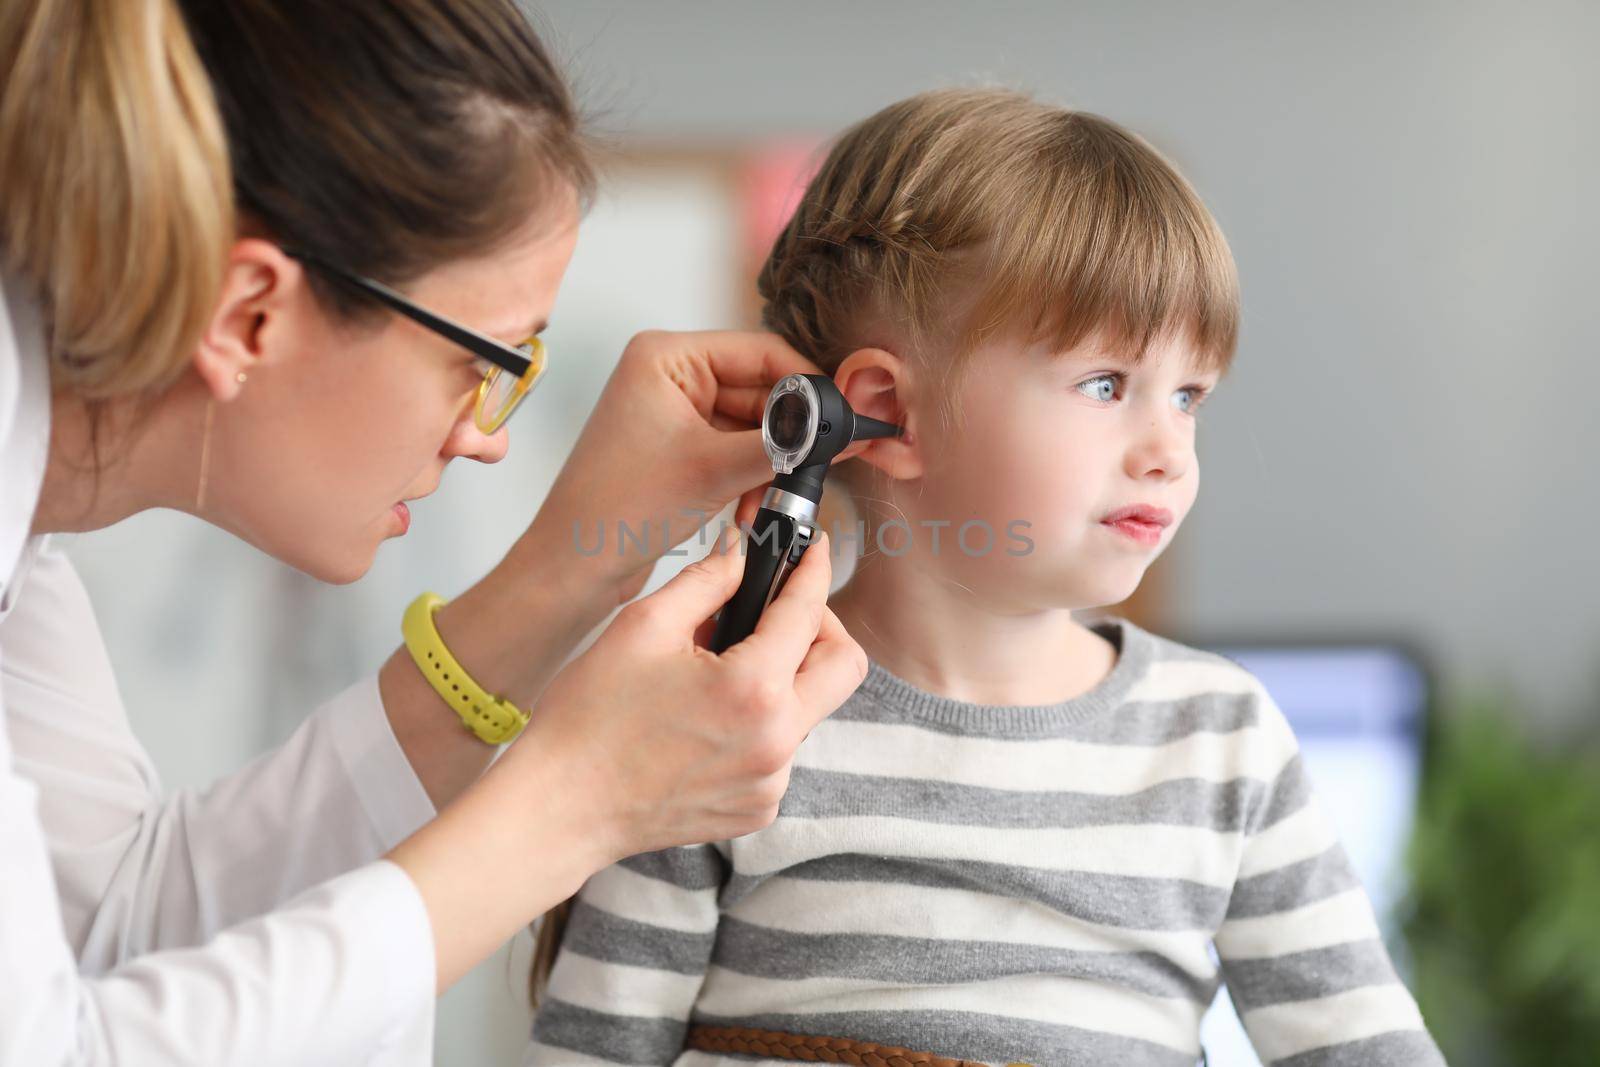 ENT doctor conducts physical examination of little girl ear by kuprevich